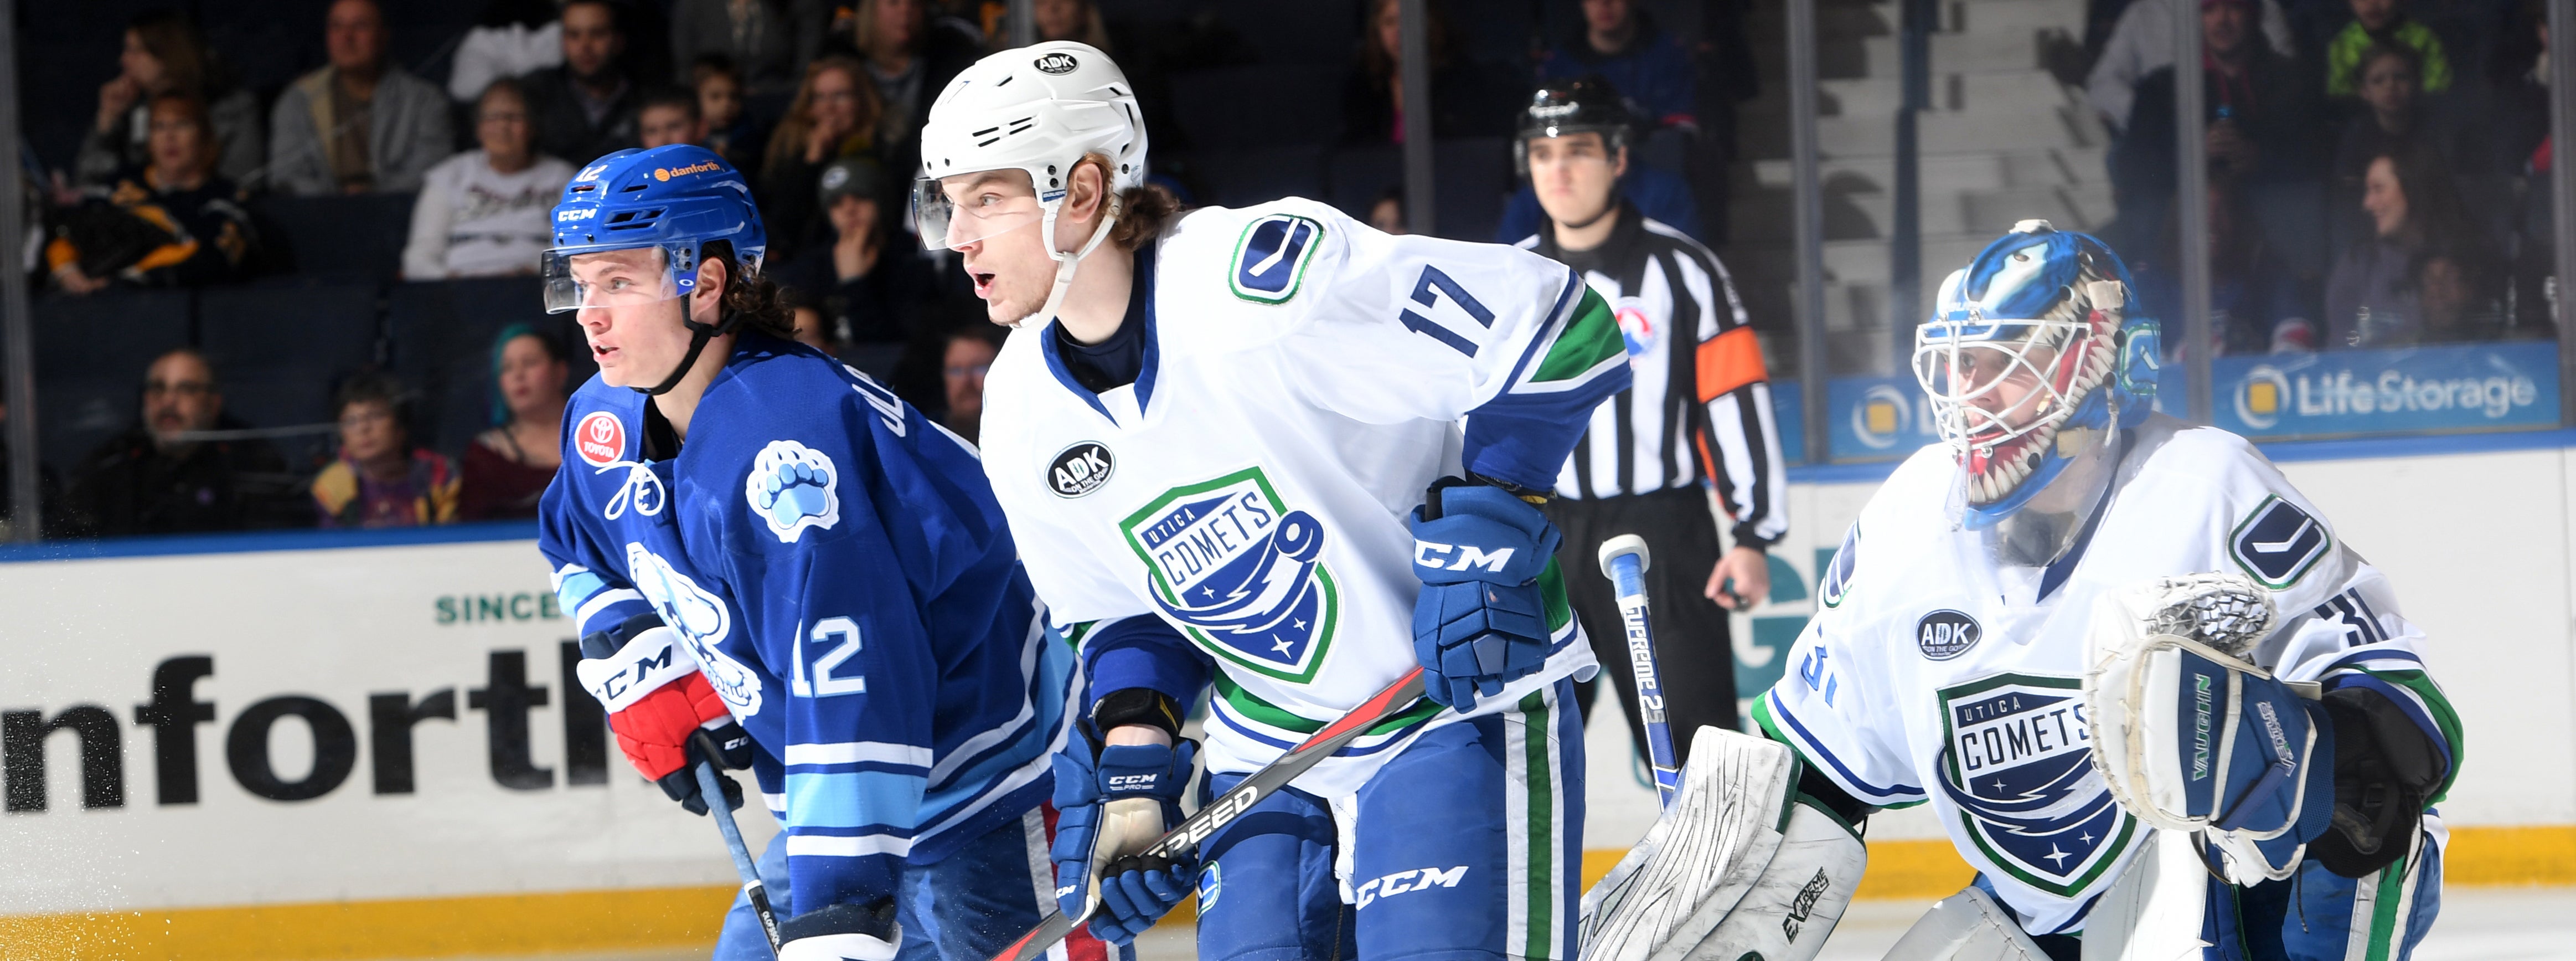 KULBAKOV'S 48 STOPS HELP COMETS TO POINT